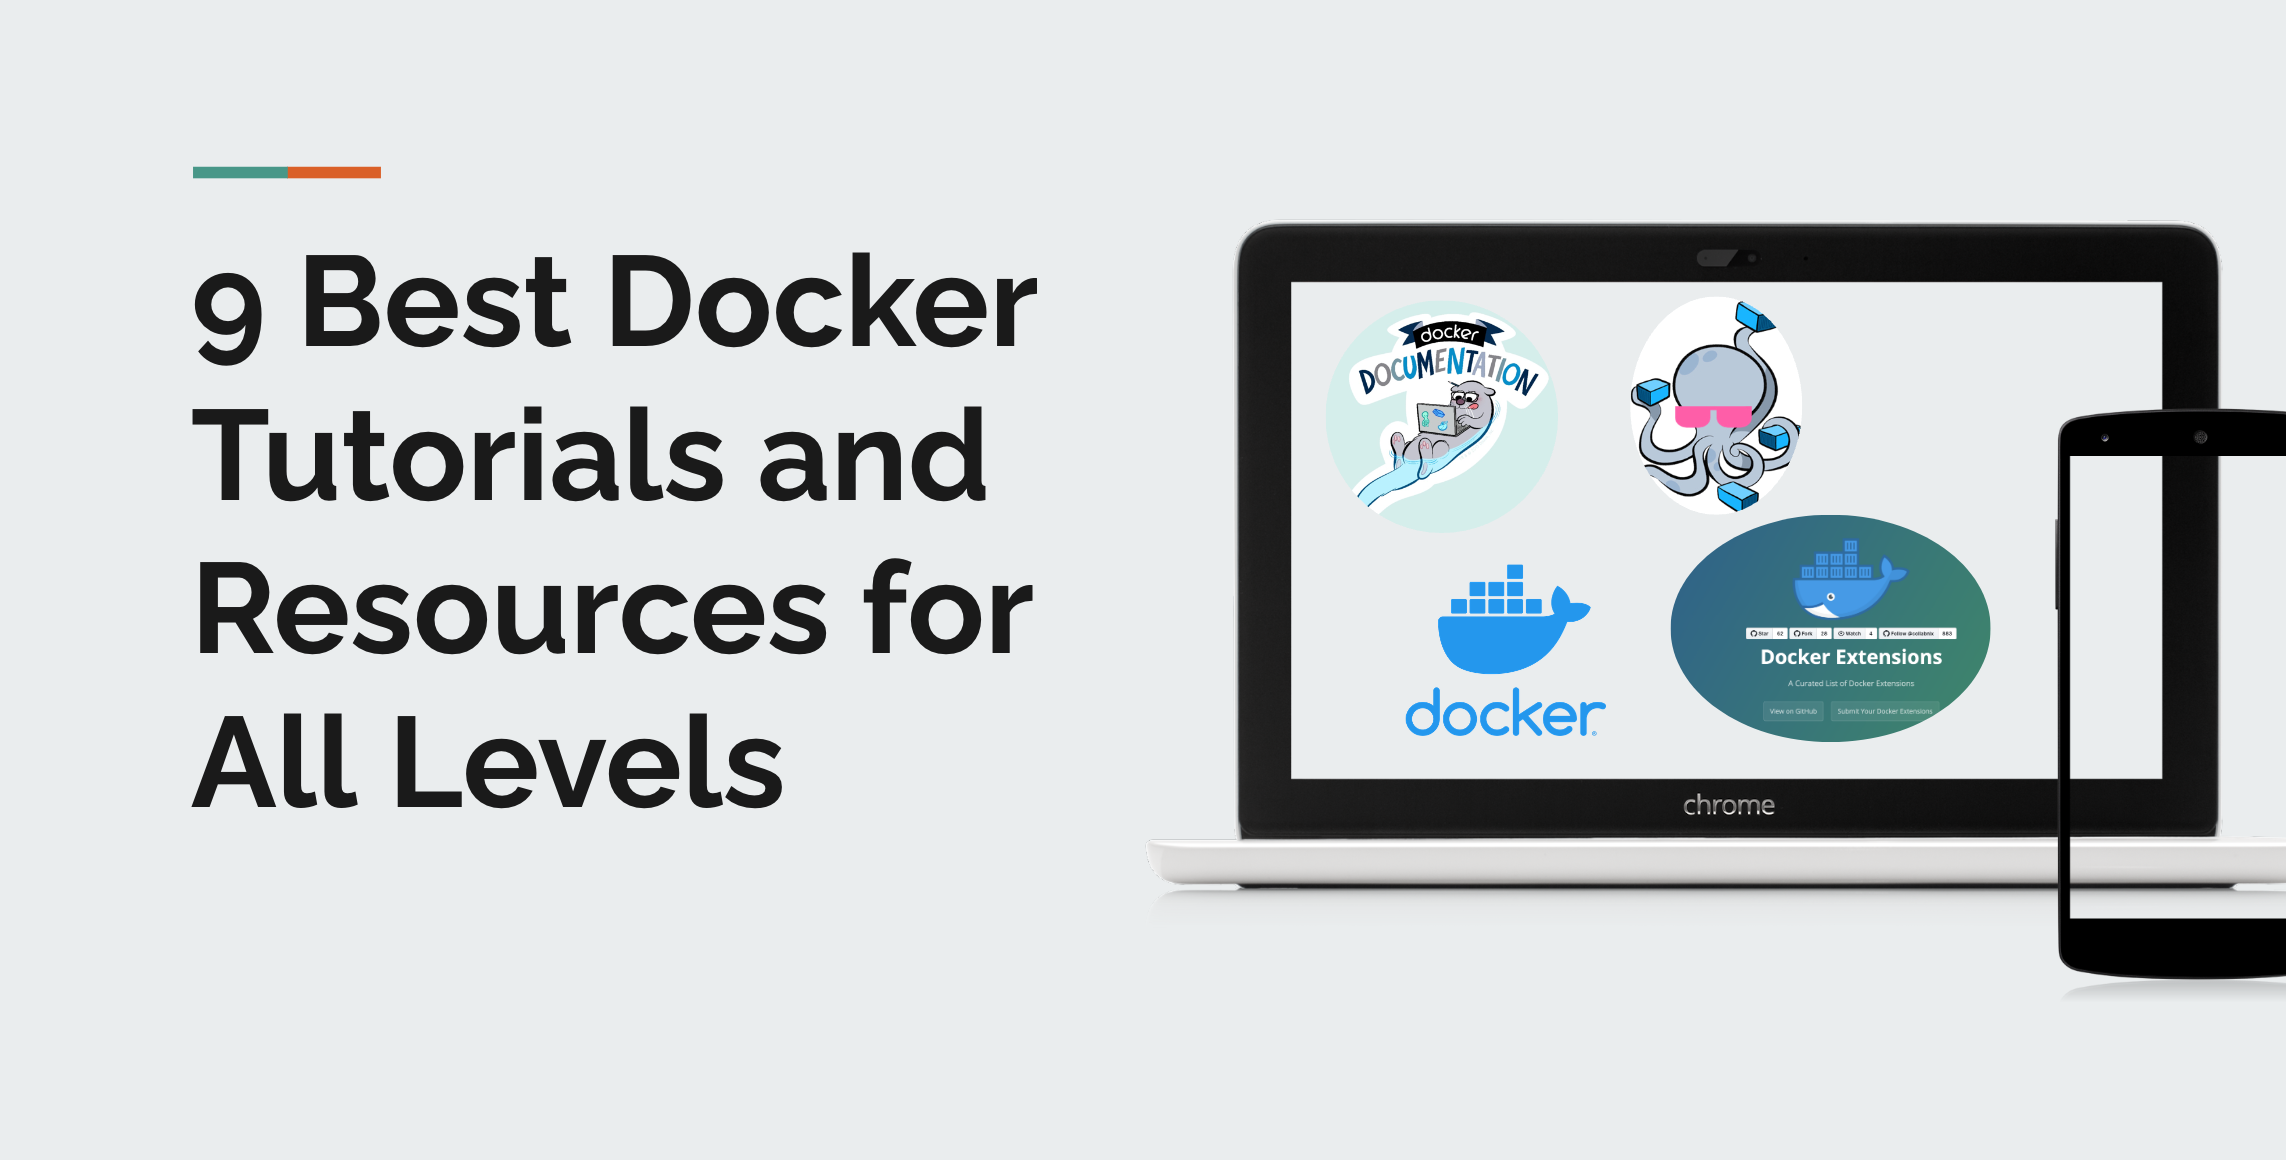 9 Best Docker and Kubernetes Resources for All Levels